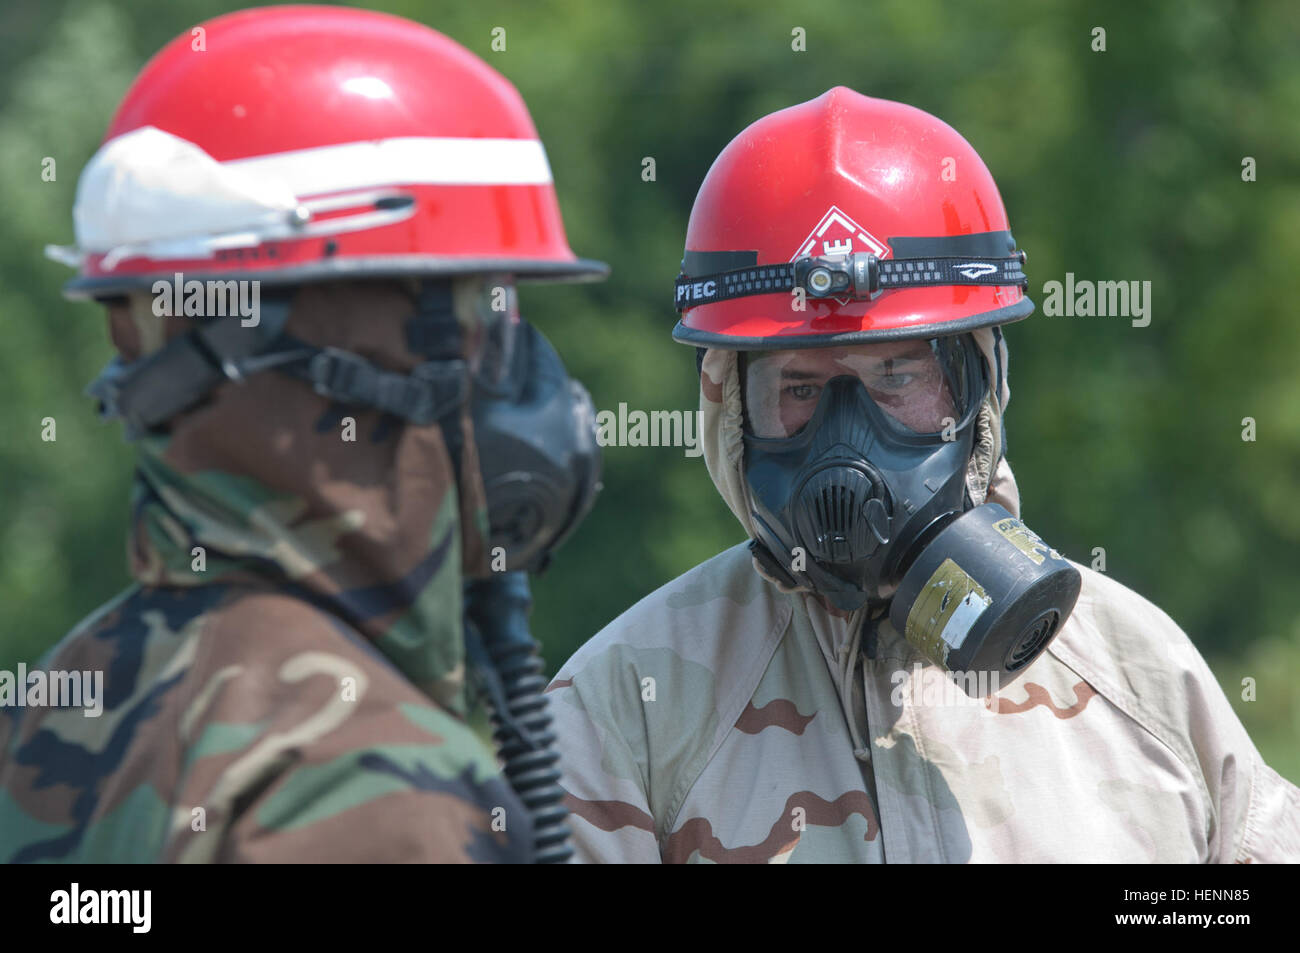 Soldiers of the 11th Engineer Battalion, Fort Benning, Ga., evacuate survivors of a nuclear blast, escorting them to a decontamination zone to receive medical treatment during Vibrant Response, a training exercise held at the Muscatatuck Urban Training Complex, Ind., July 24, 2014. Vibrant Response is a major field training exercise conducted by the U.S. Northern Command and led by U.S. Army North. Approximately 5,000 service members and civilians from the military and other federal and state agencies throughout the country are training to respond to a catastrophic domestic incident. As a comp Stock Photo